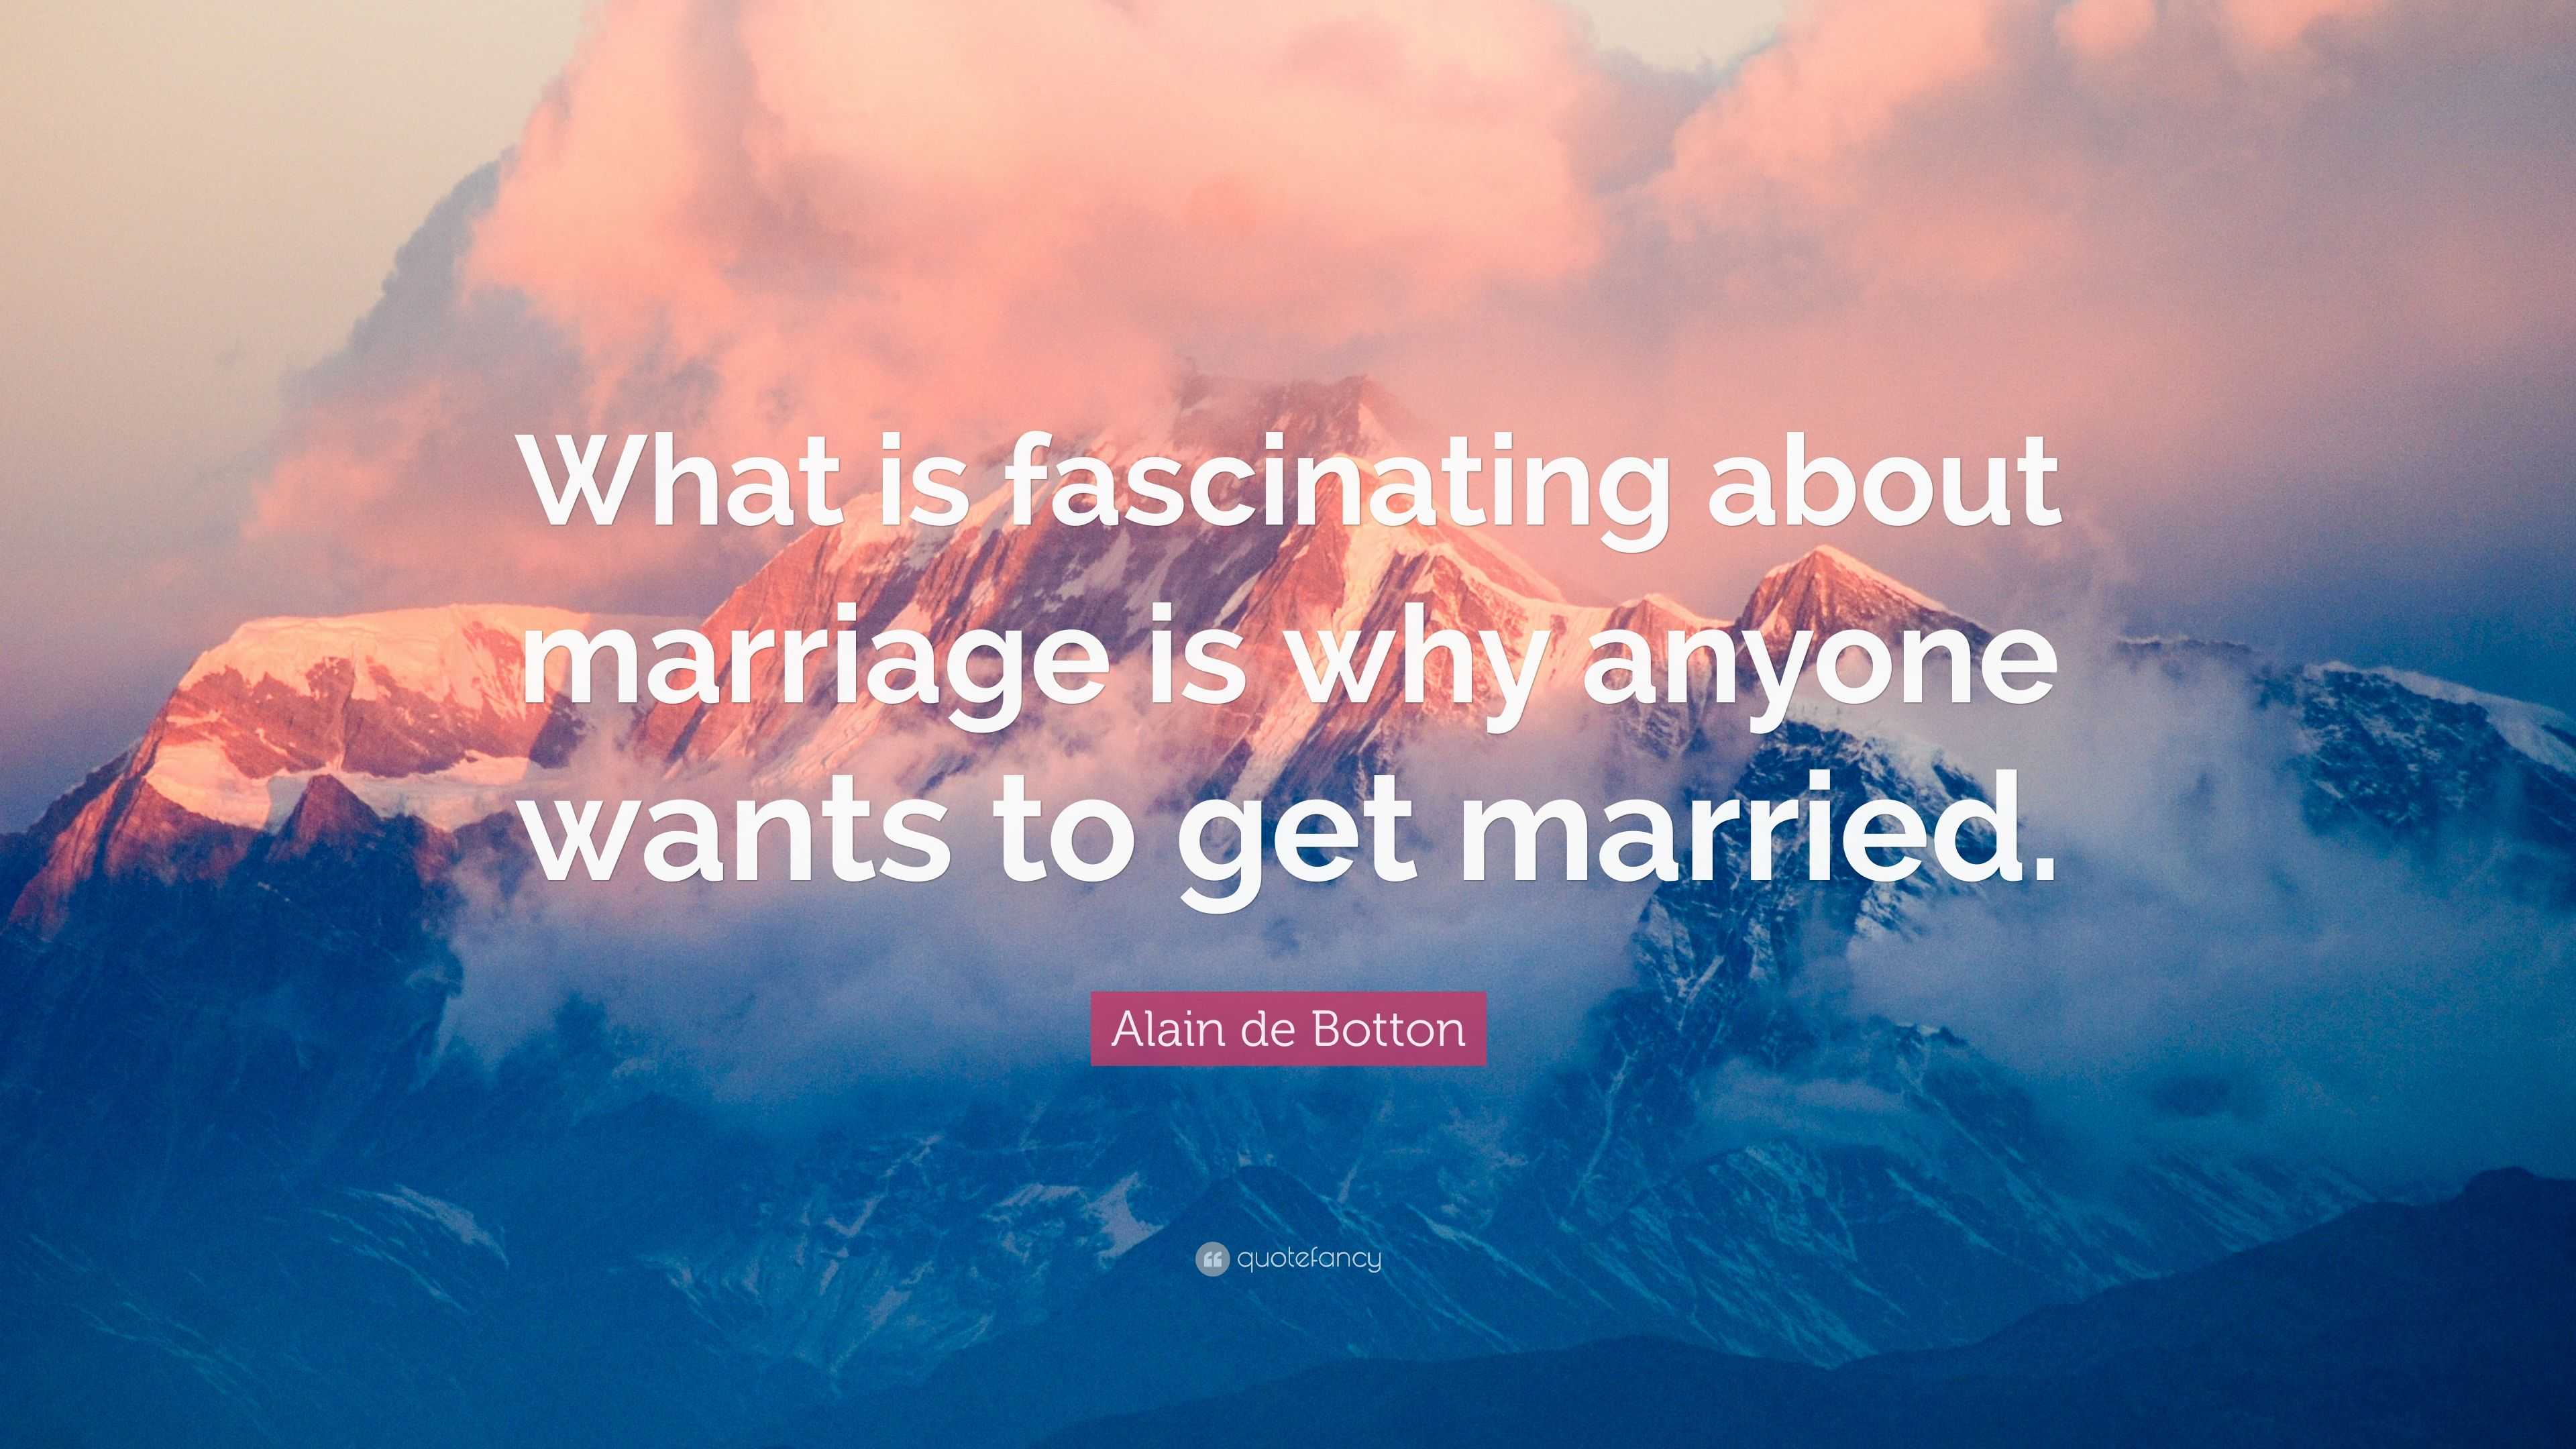 Alain de Botton Quote: “What is fascinating about marriage is why ...